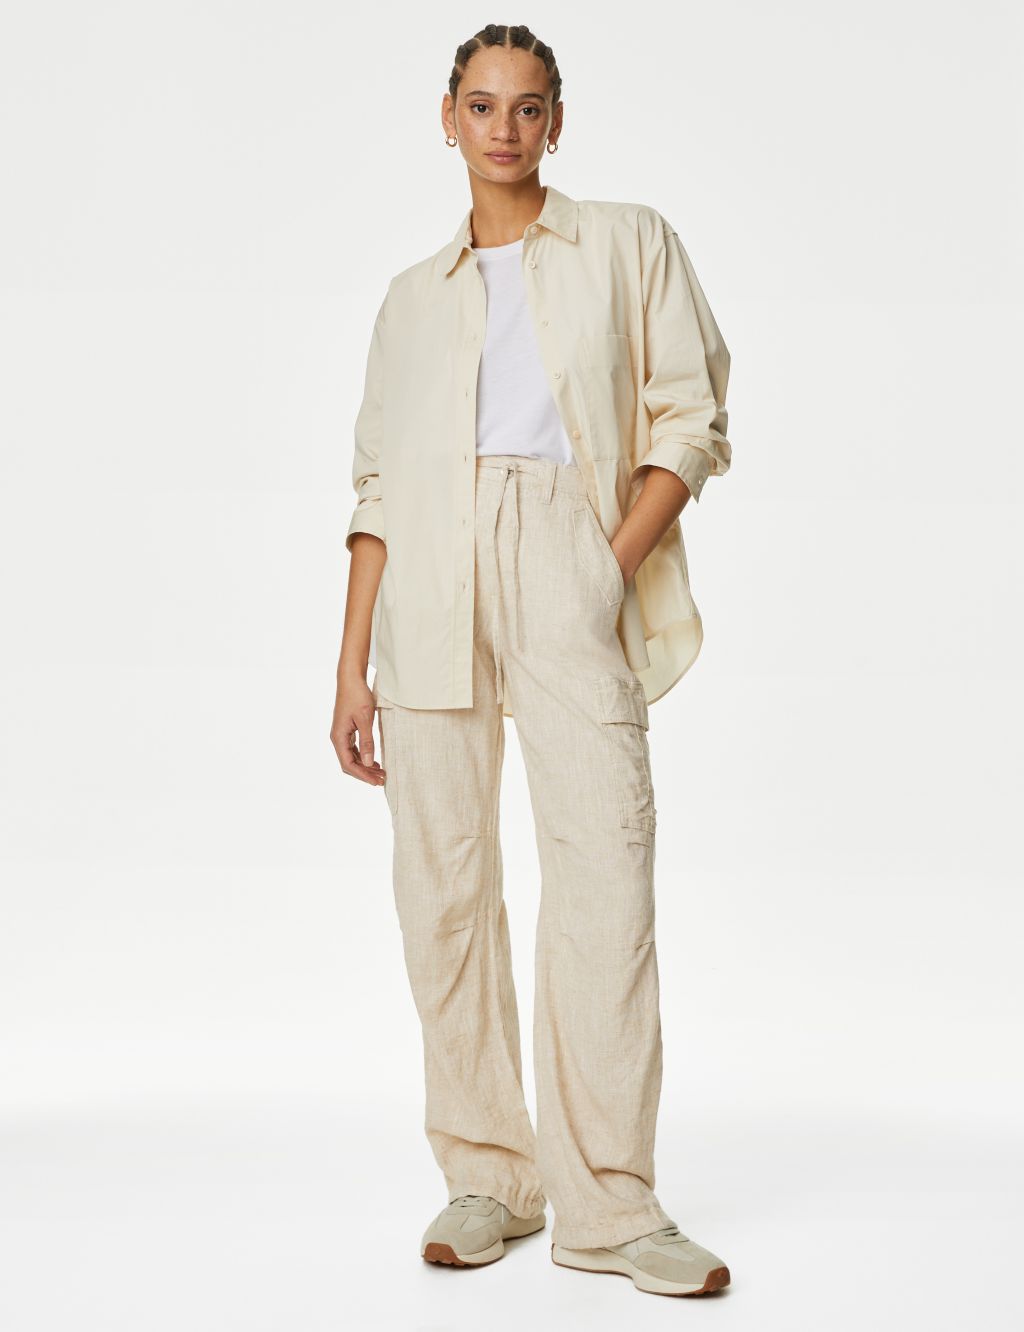 M&S' 'crease proof' £22 linen trousers that 'keep you cool in hot weather'  - Daily Record